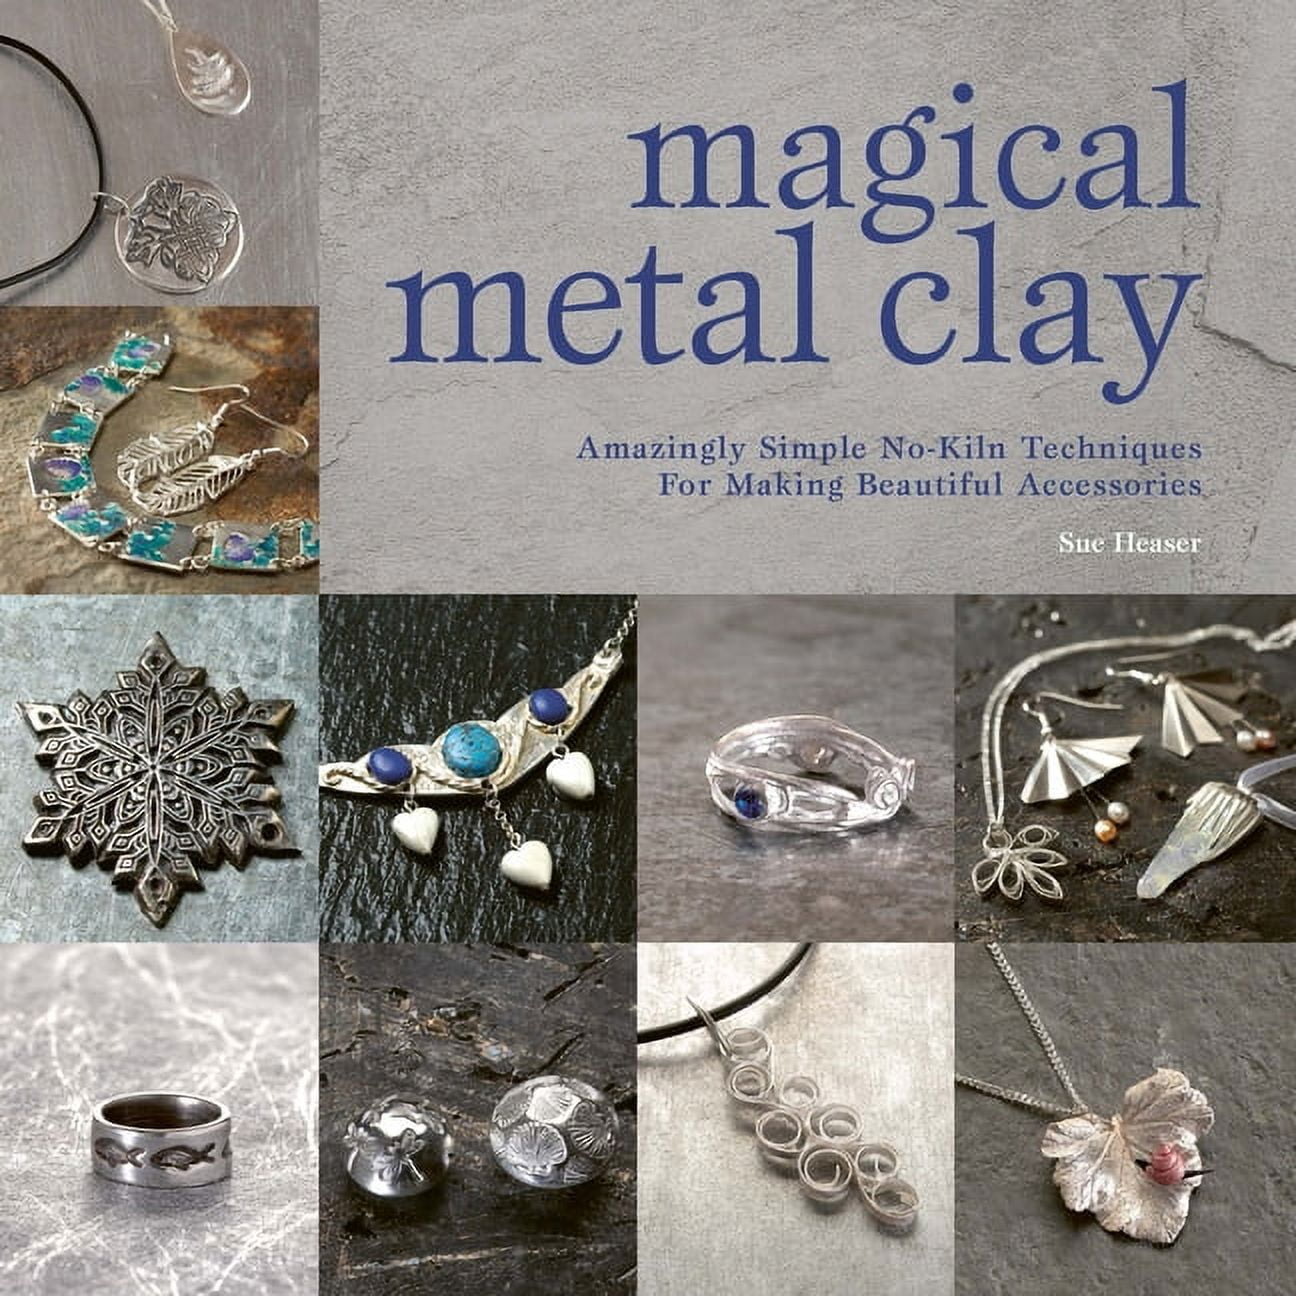 Advanced Metal Clay Series: Resin Jewelry Using Art Clay Online